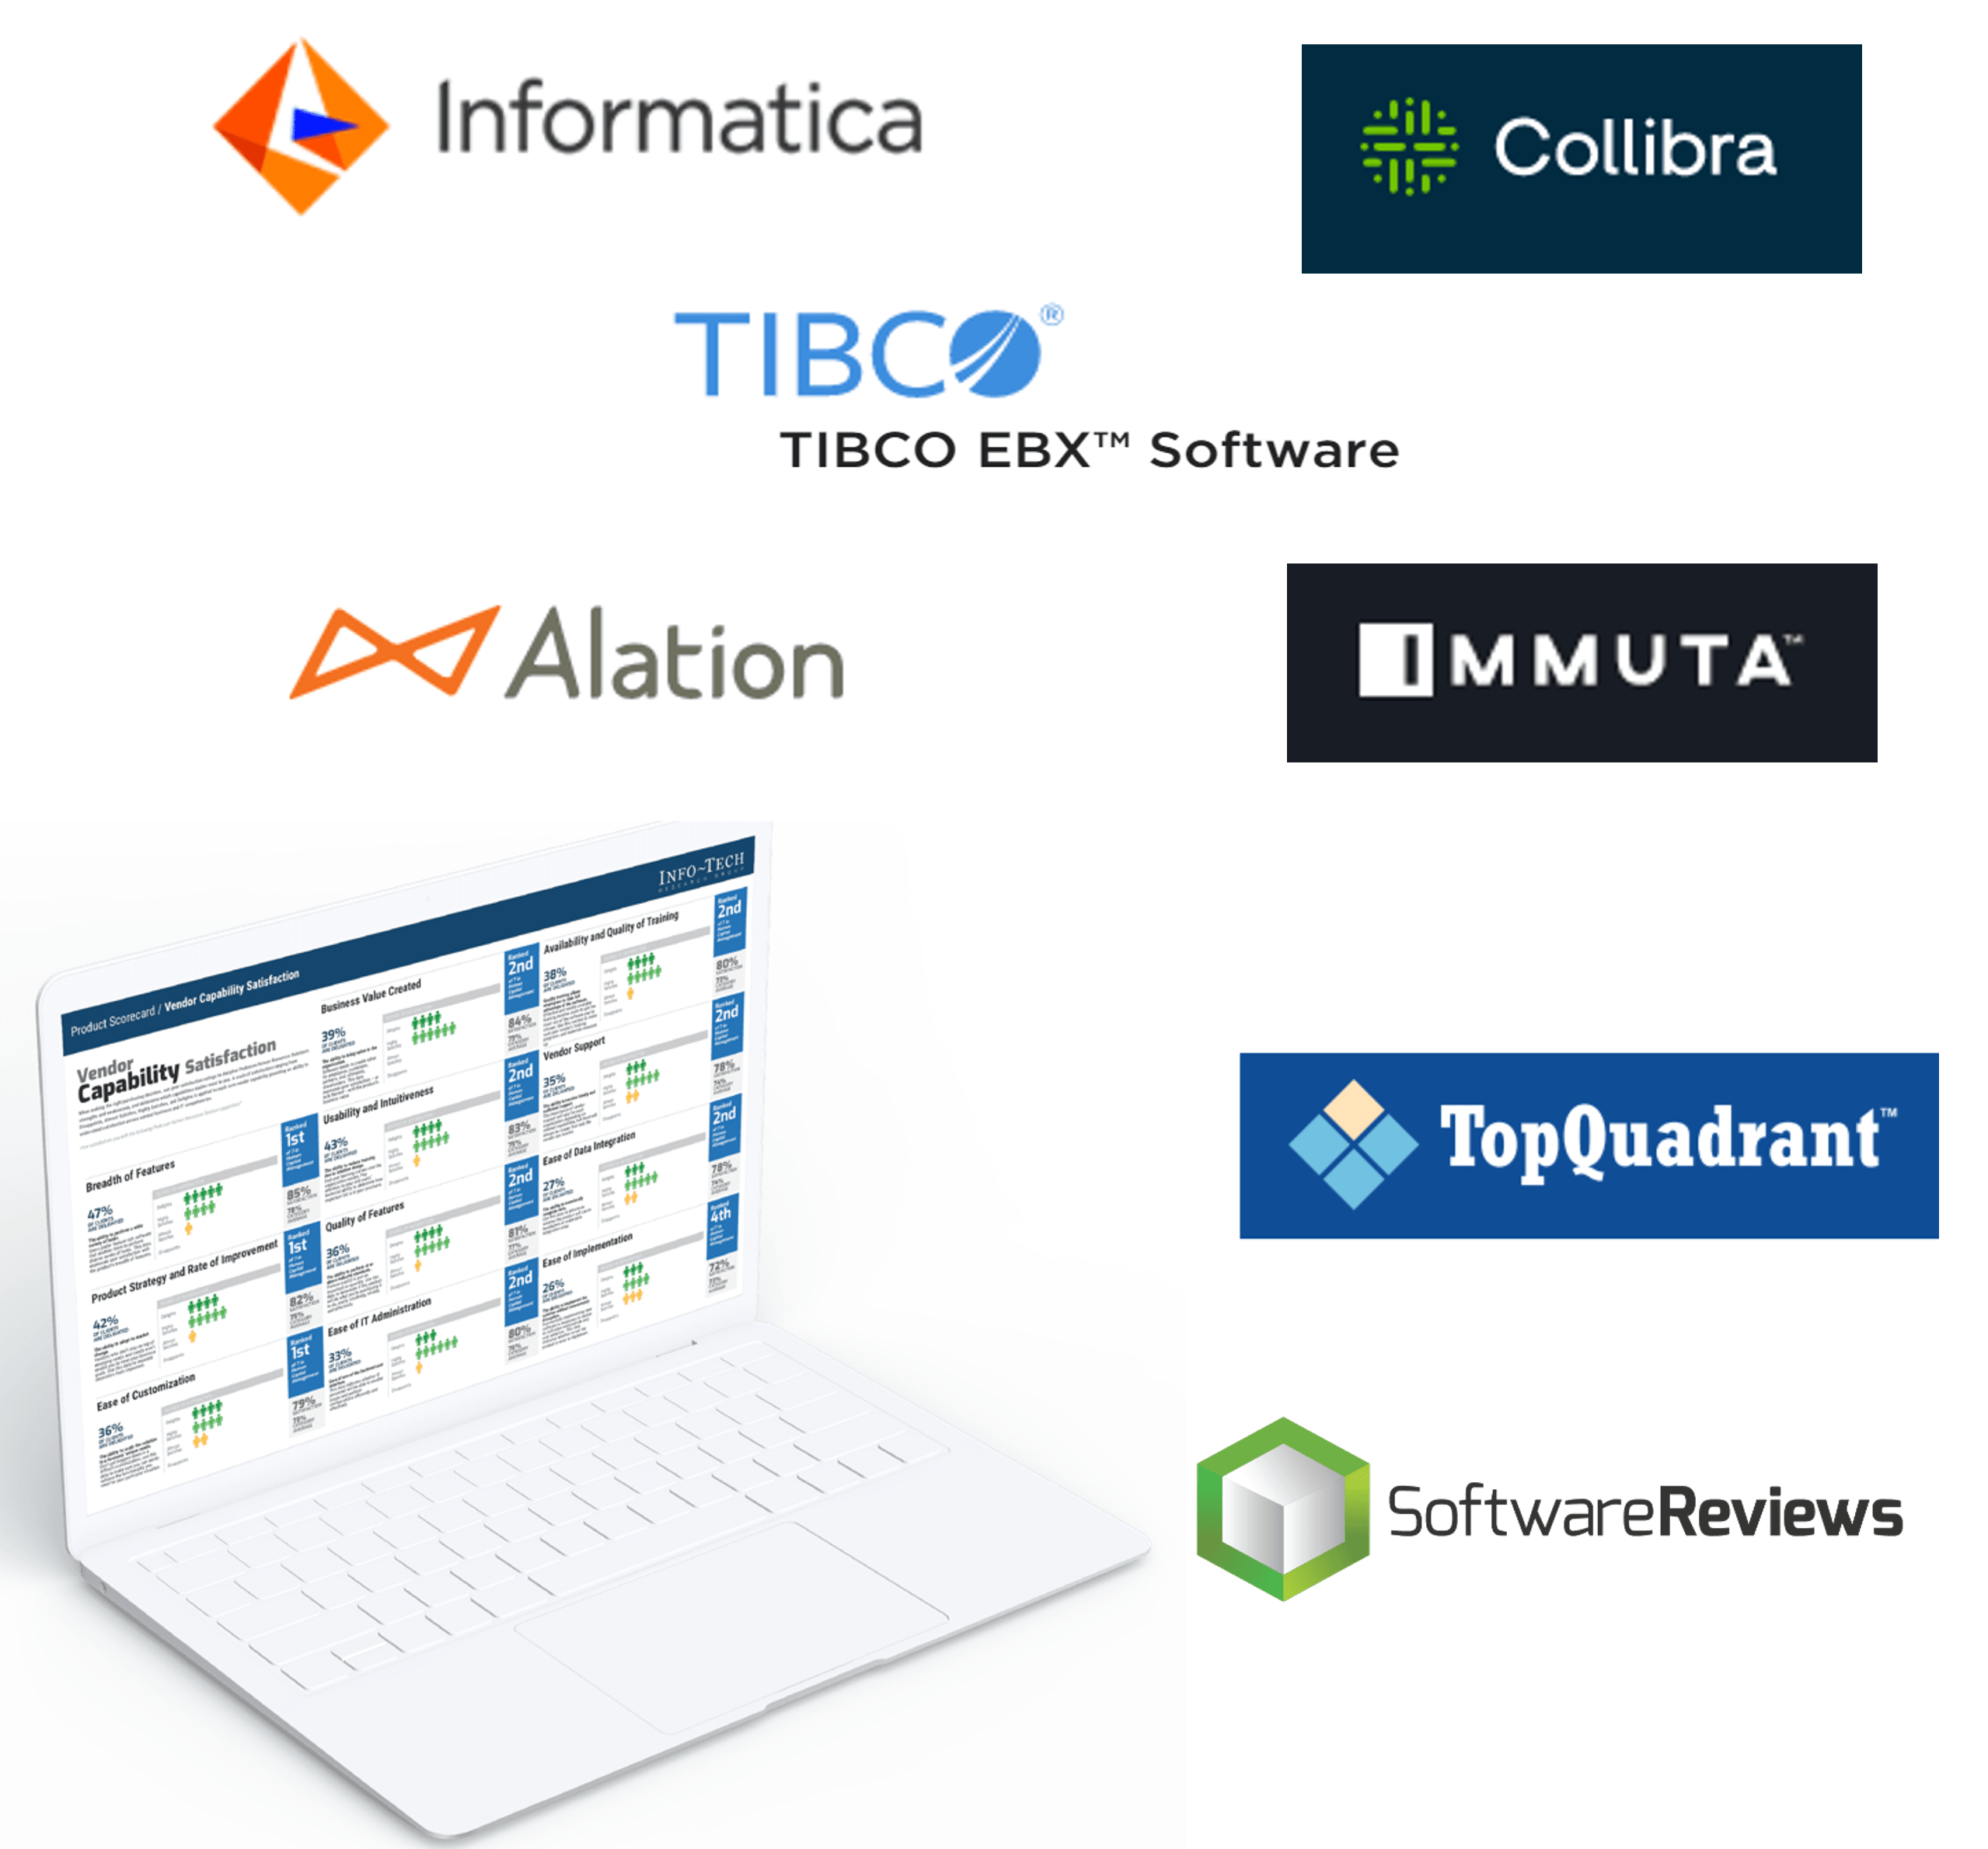 Array of logos of tech companies whose products are used for this type of work: Informatica, Collibra, Tibco, Alation, Immuta, TopQuadrant, and SoftwareReviews.